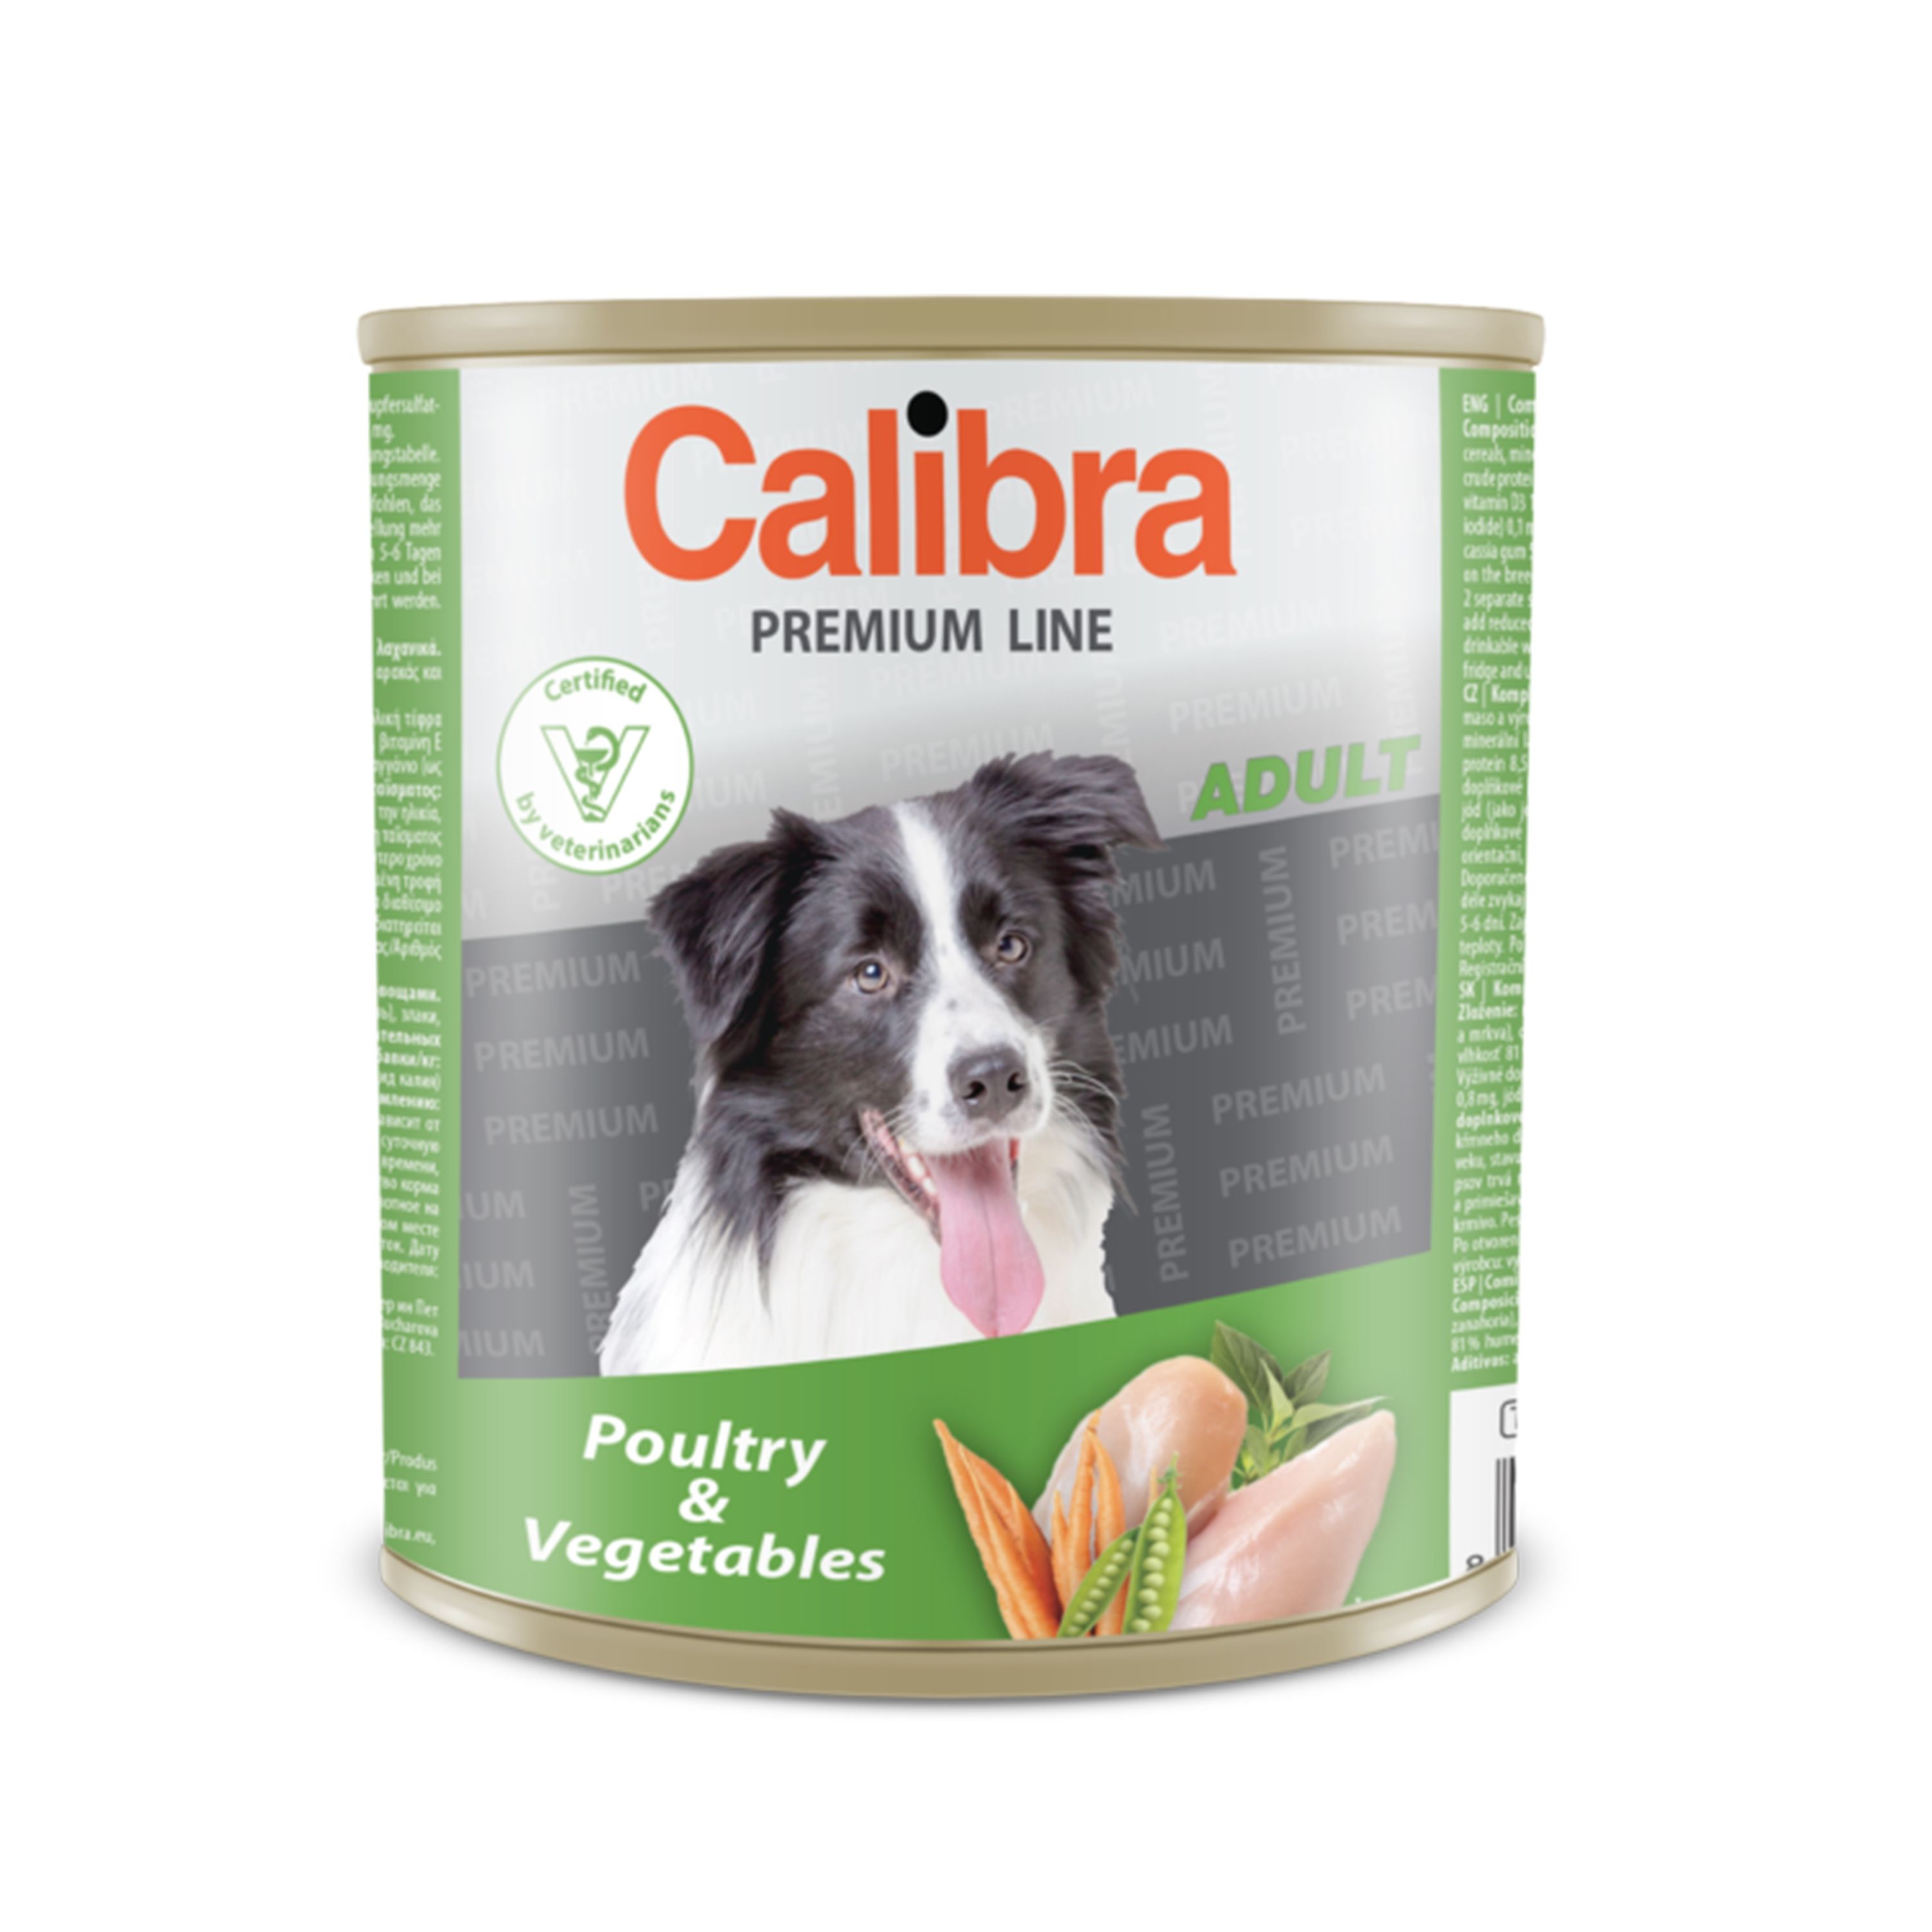 Calibra Premium Adult Poultry and Vegetables, 800 g